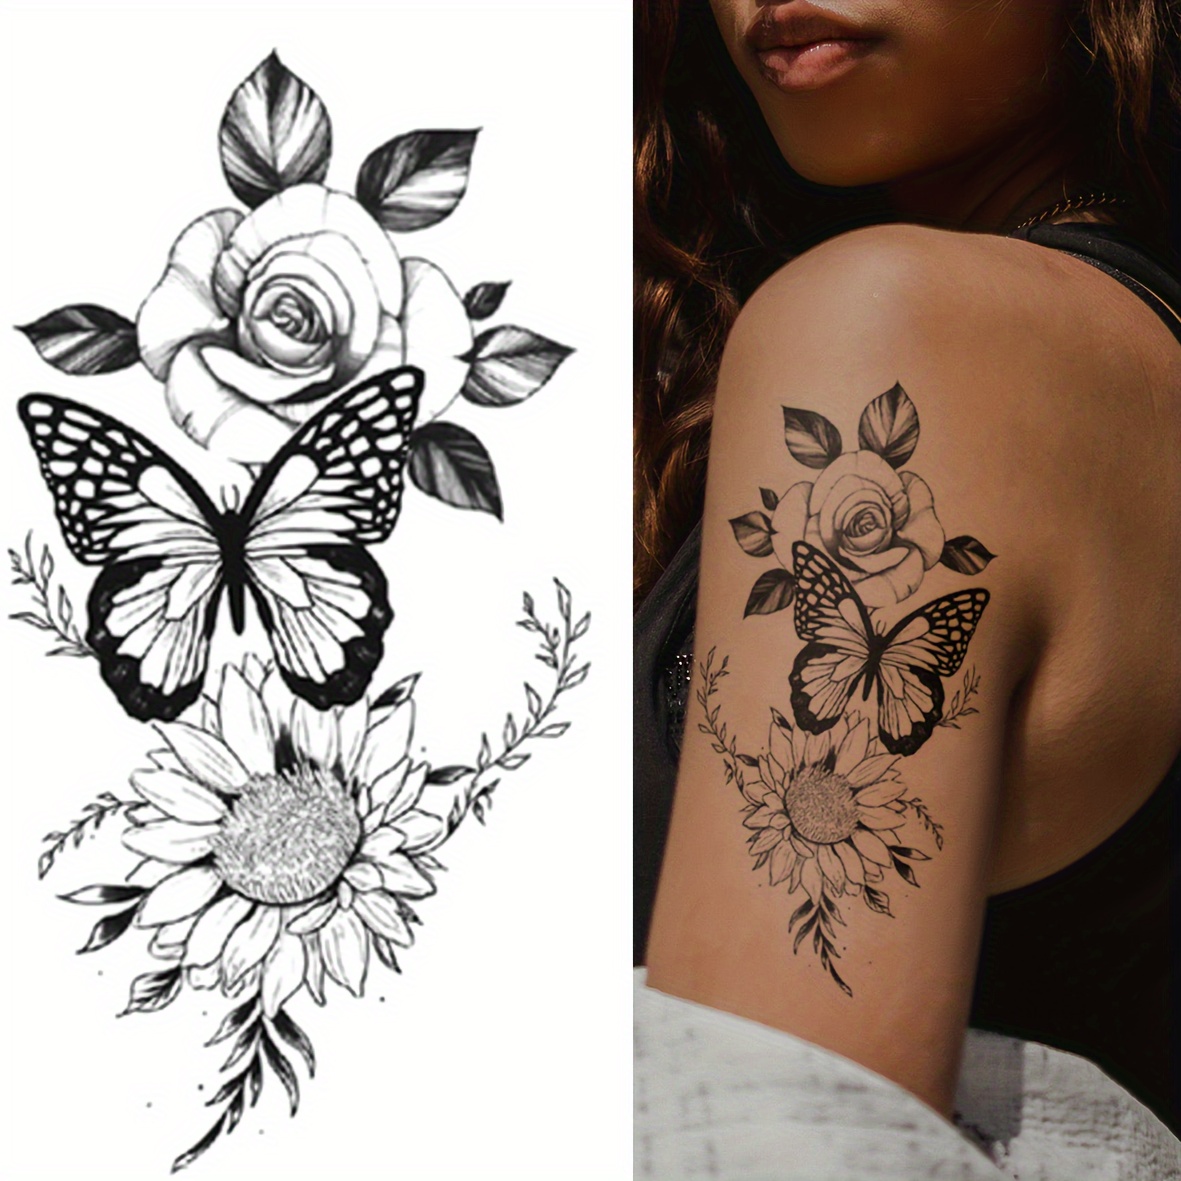 Temporary Tattoos For Women -110 Temporary Tattoo Stickers Of Flowers &  Phrases- Fake Tattoos Temporary Realistic & Aesthetic - Tatoos For Women &  Tatoos For Adults - Tatuajes Temporales Women Unisex